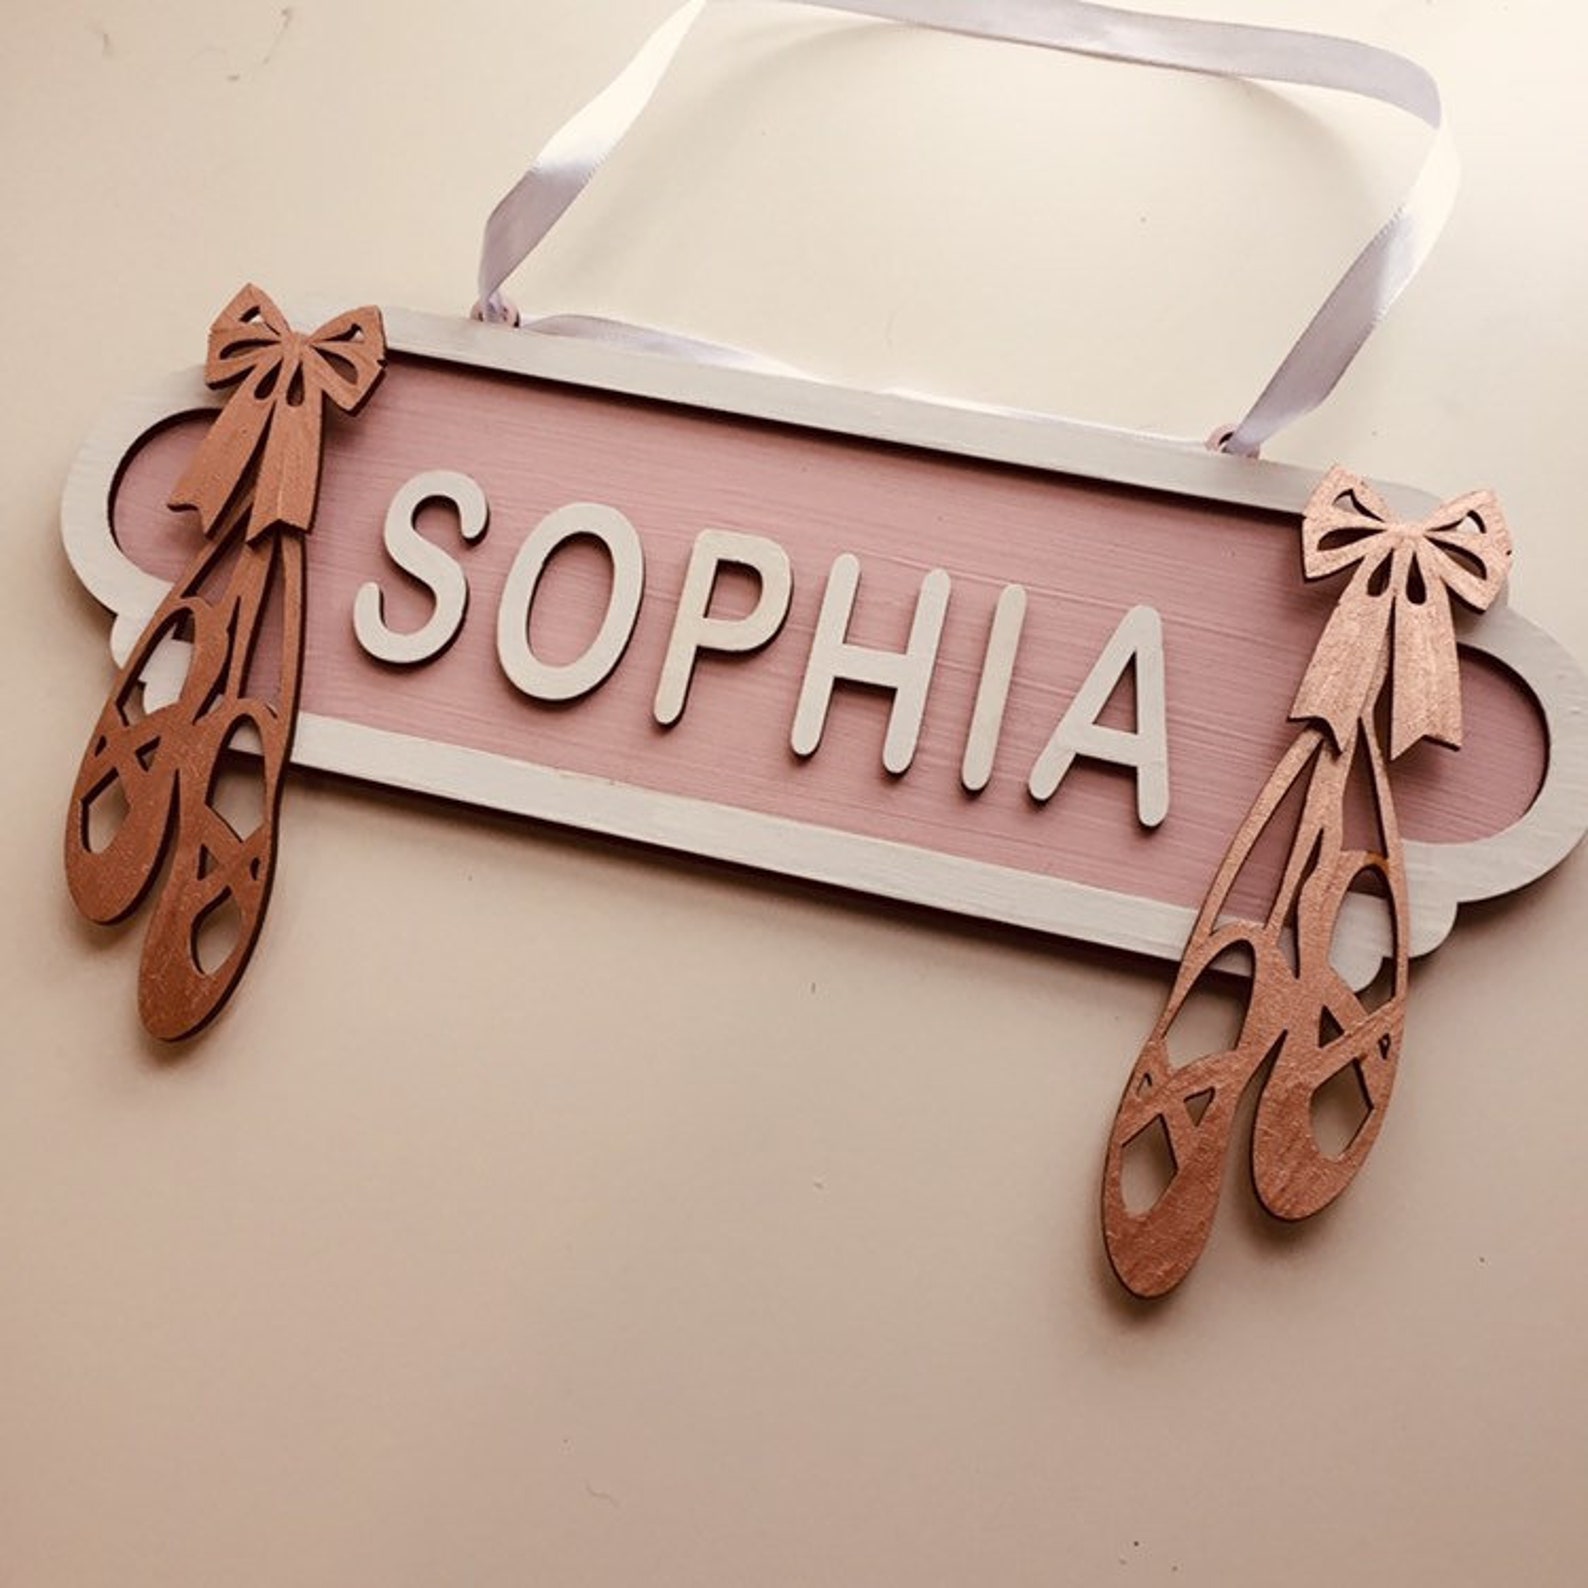 ballet street sign, girls birthday gift, rose gold sign, personalised wooden plaque, new baby present, rosegold decor